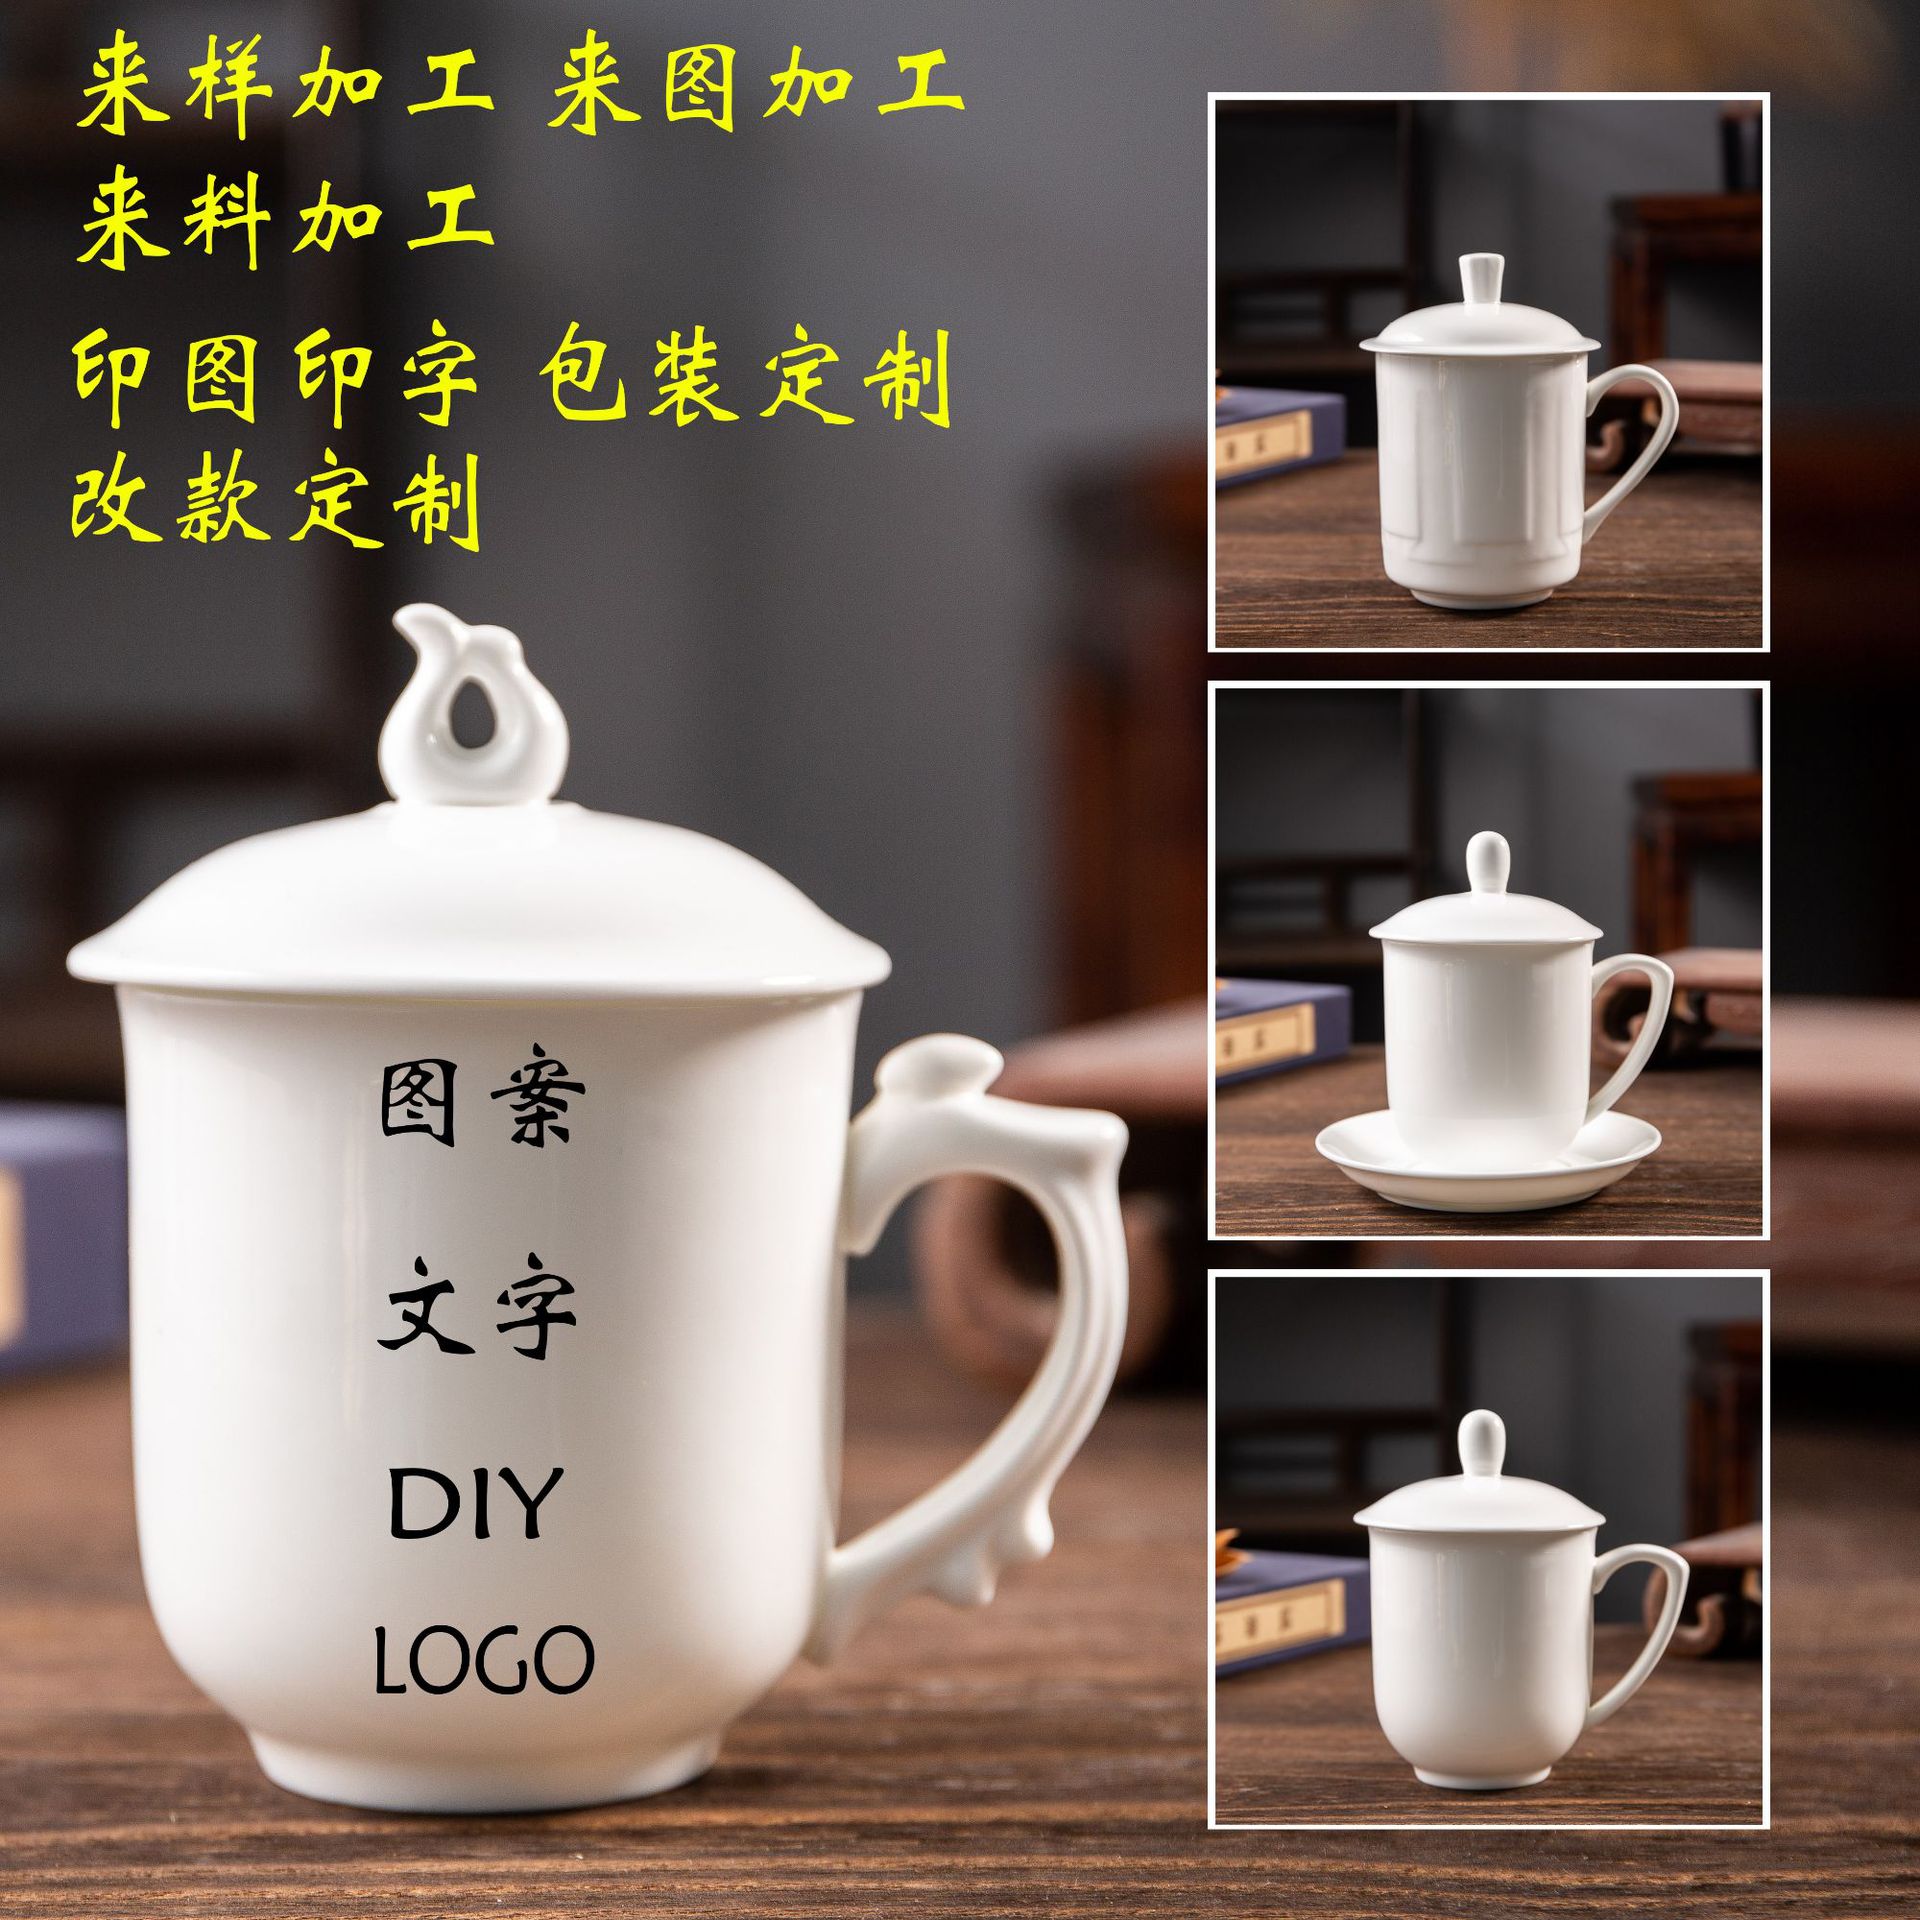 Jingdezhen Custom Ceramic with Lid Office Cup Blue and White Bone China Mug Business Gift Conference Cup Logo Printing